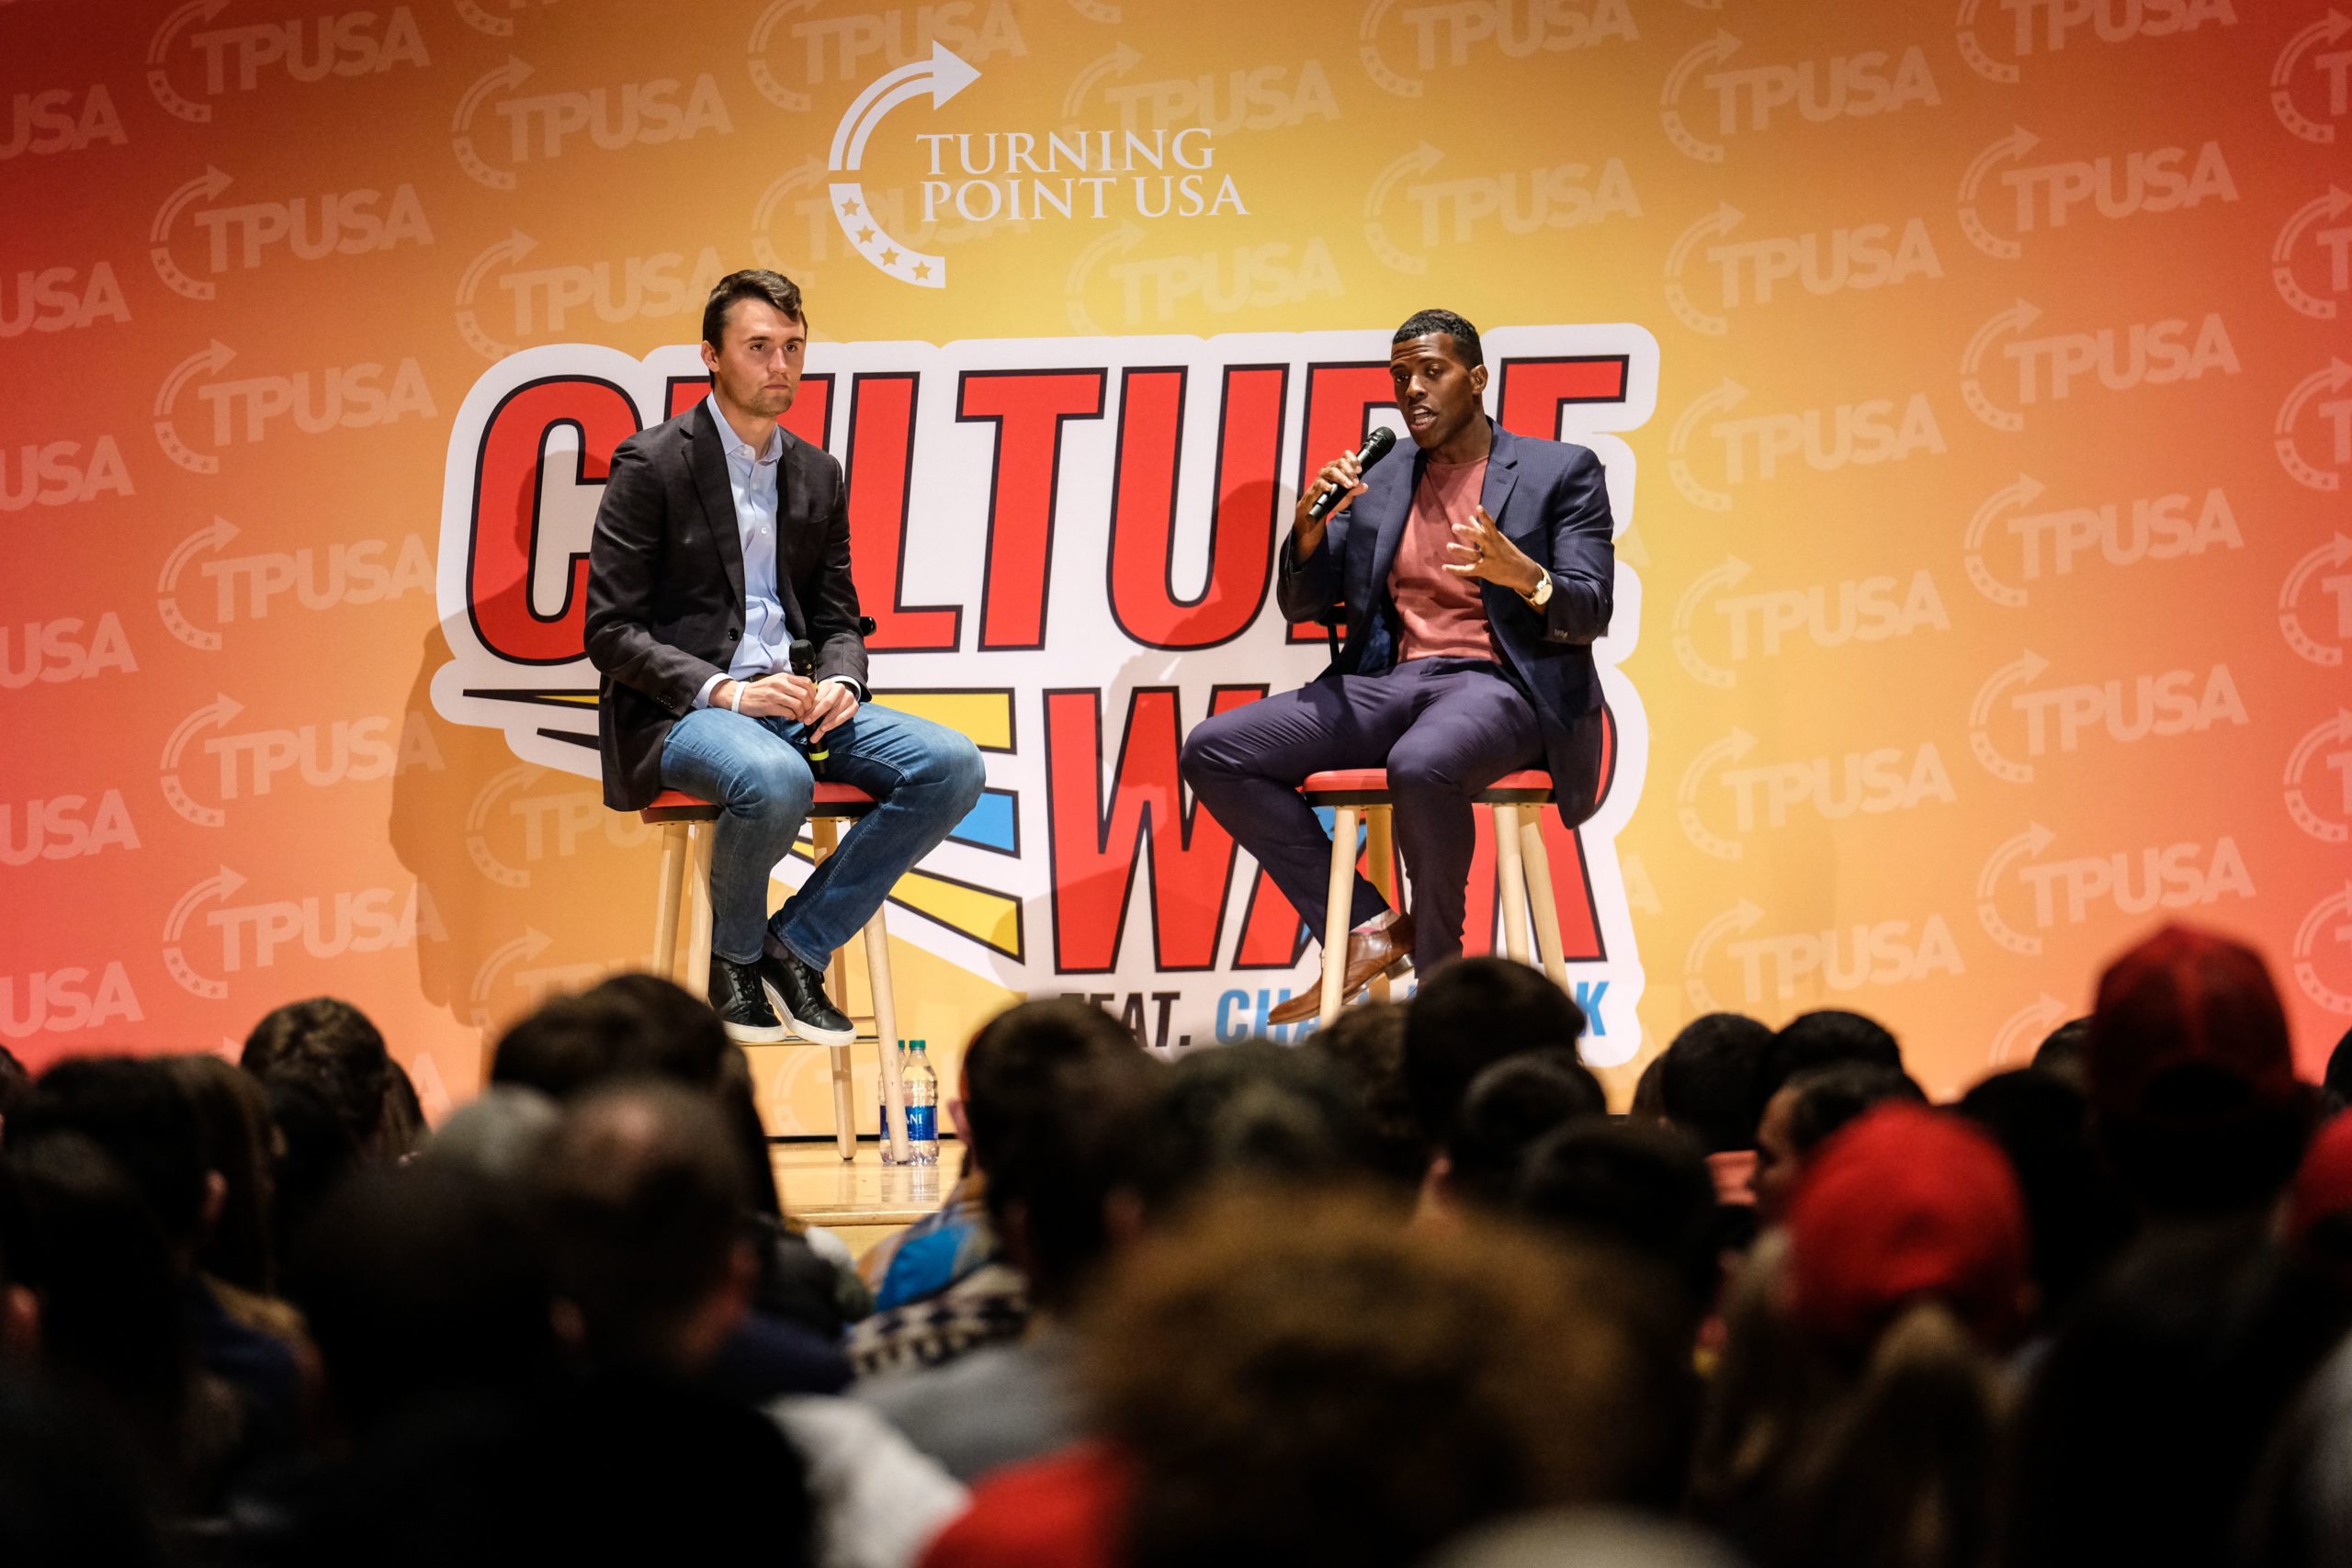 Charlie Kirk and Rob Smith speak at Turning Point USA (TPUSA) Culture War event at the Ohio State University in Columbus, Ohio on October 29, 2019. The organizations mission is to identify, educate, train, and organize students to promote conservative principles. - They like his straightforward speaking style, his policies on immigration and the economic boom achieved during his administration. They are still teenagers, or just past 20. In a year from now, they will vote in their first presidential election in key swing state Ohio -- and they're giving Donald Trump their support. (Photo by Megan JELINGER / AFP) (Photo by MEGAN JELINGER/AFP via Getty Images)